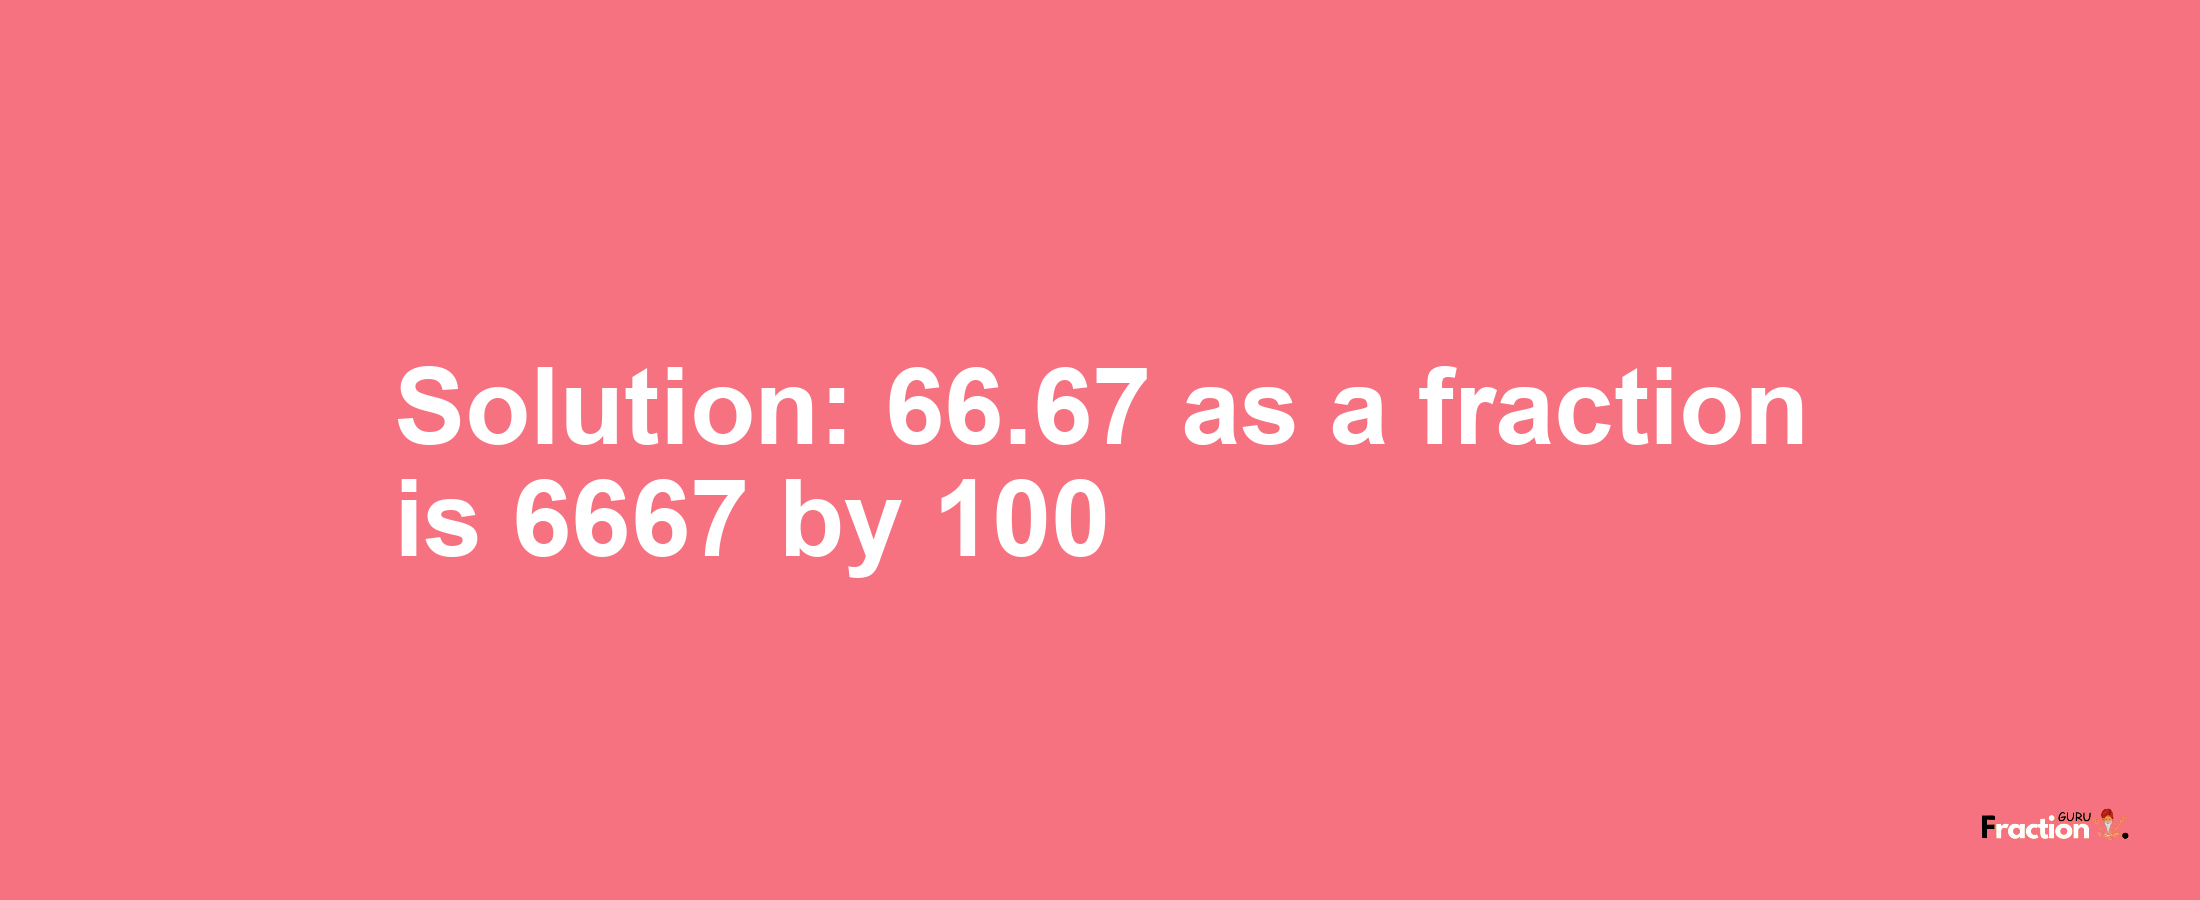 Solution:66.67 as a fraction is 6667/100